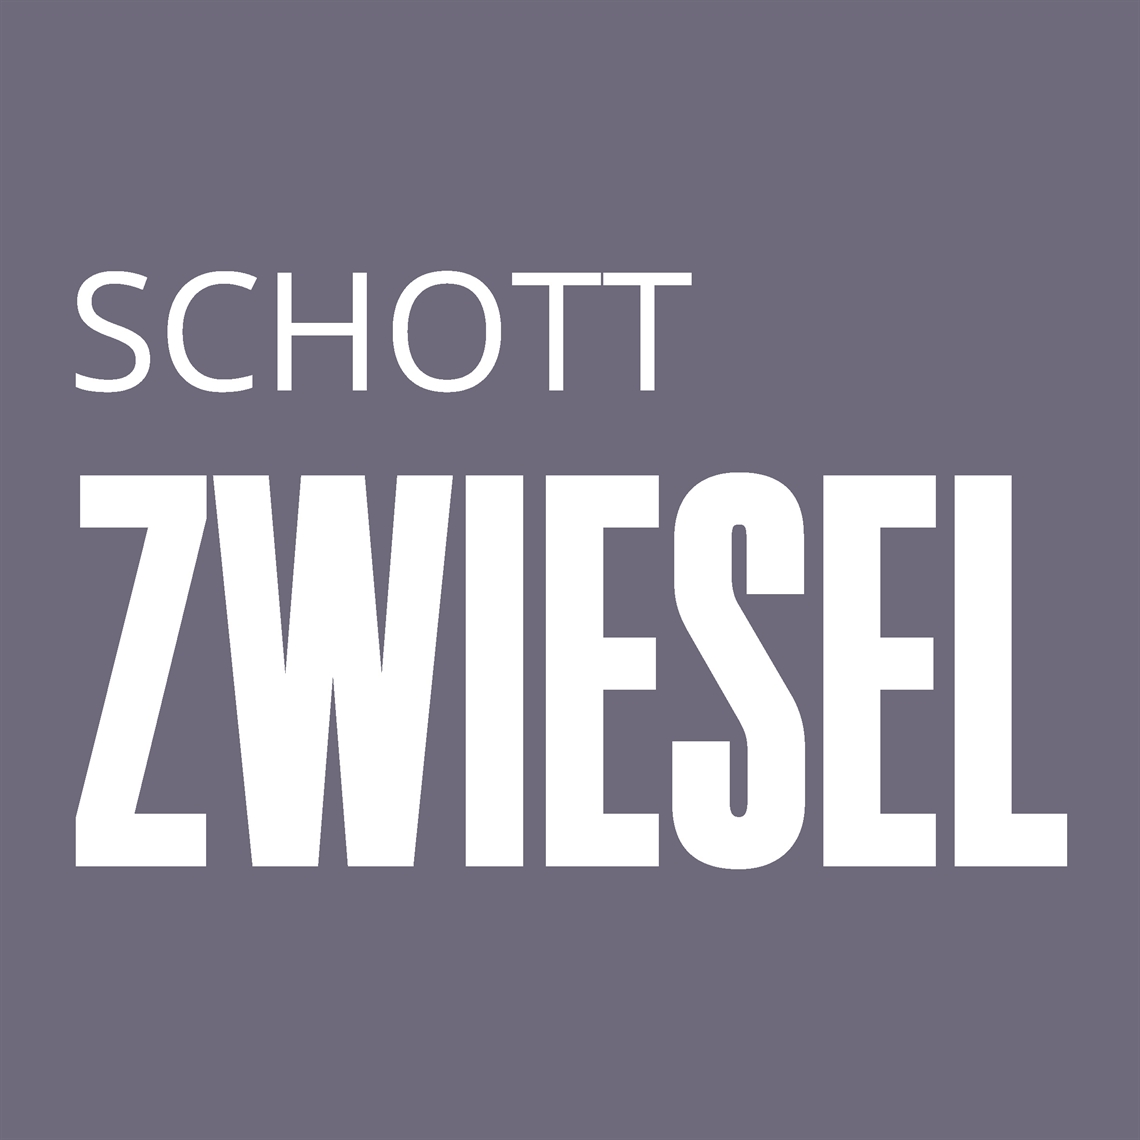 View our collection of Schott Zwiesel Ivento